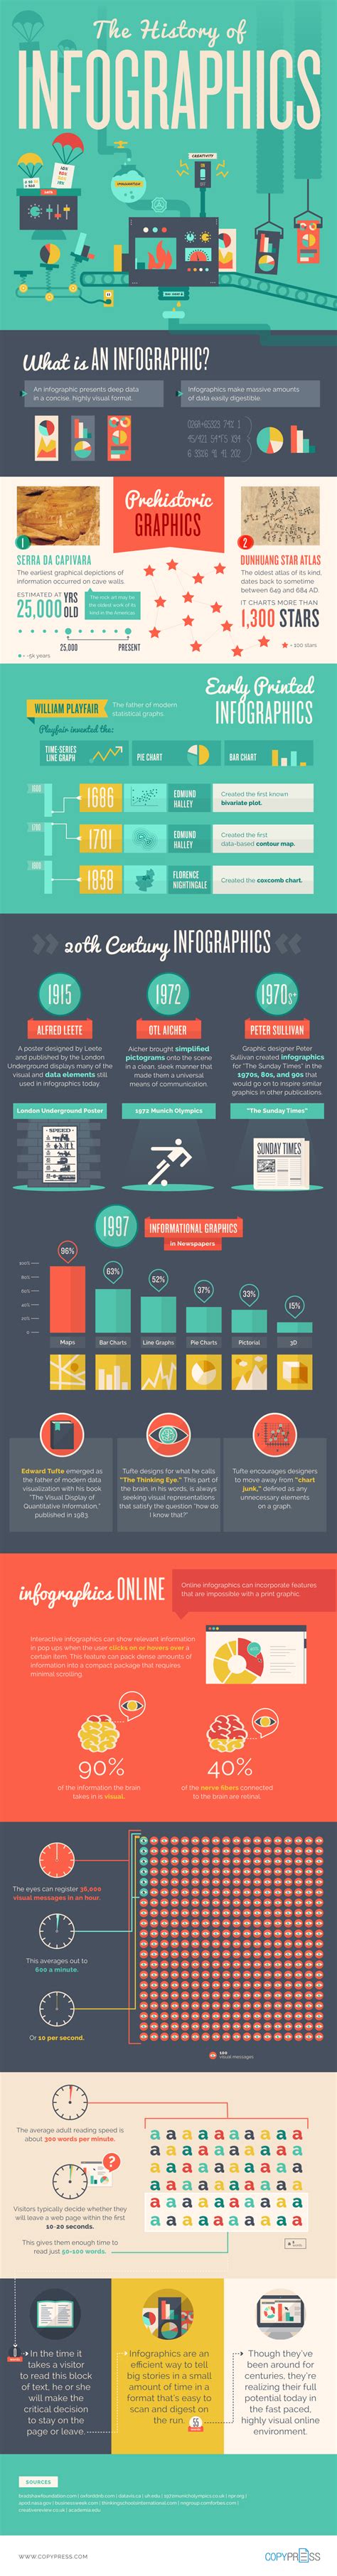 The History of Infographics [Infographic]